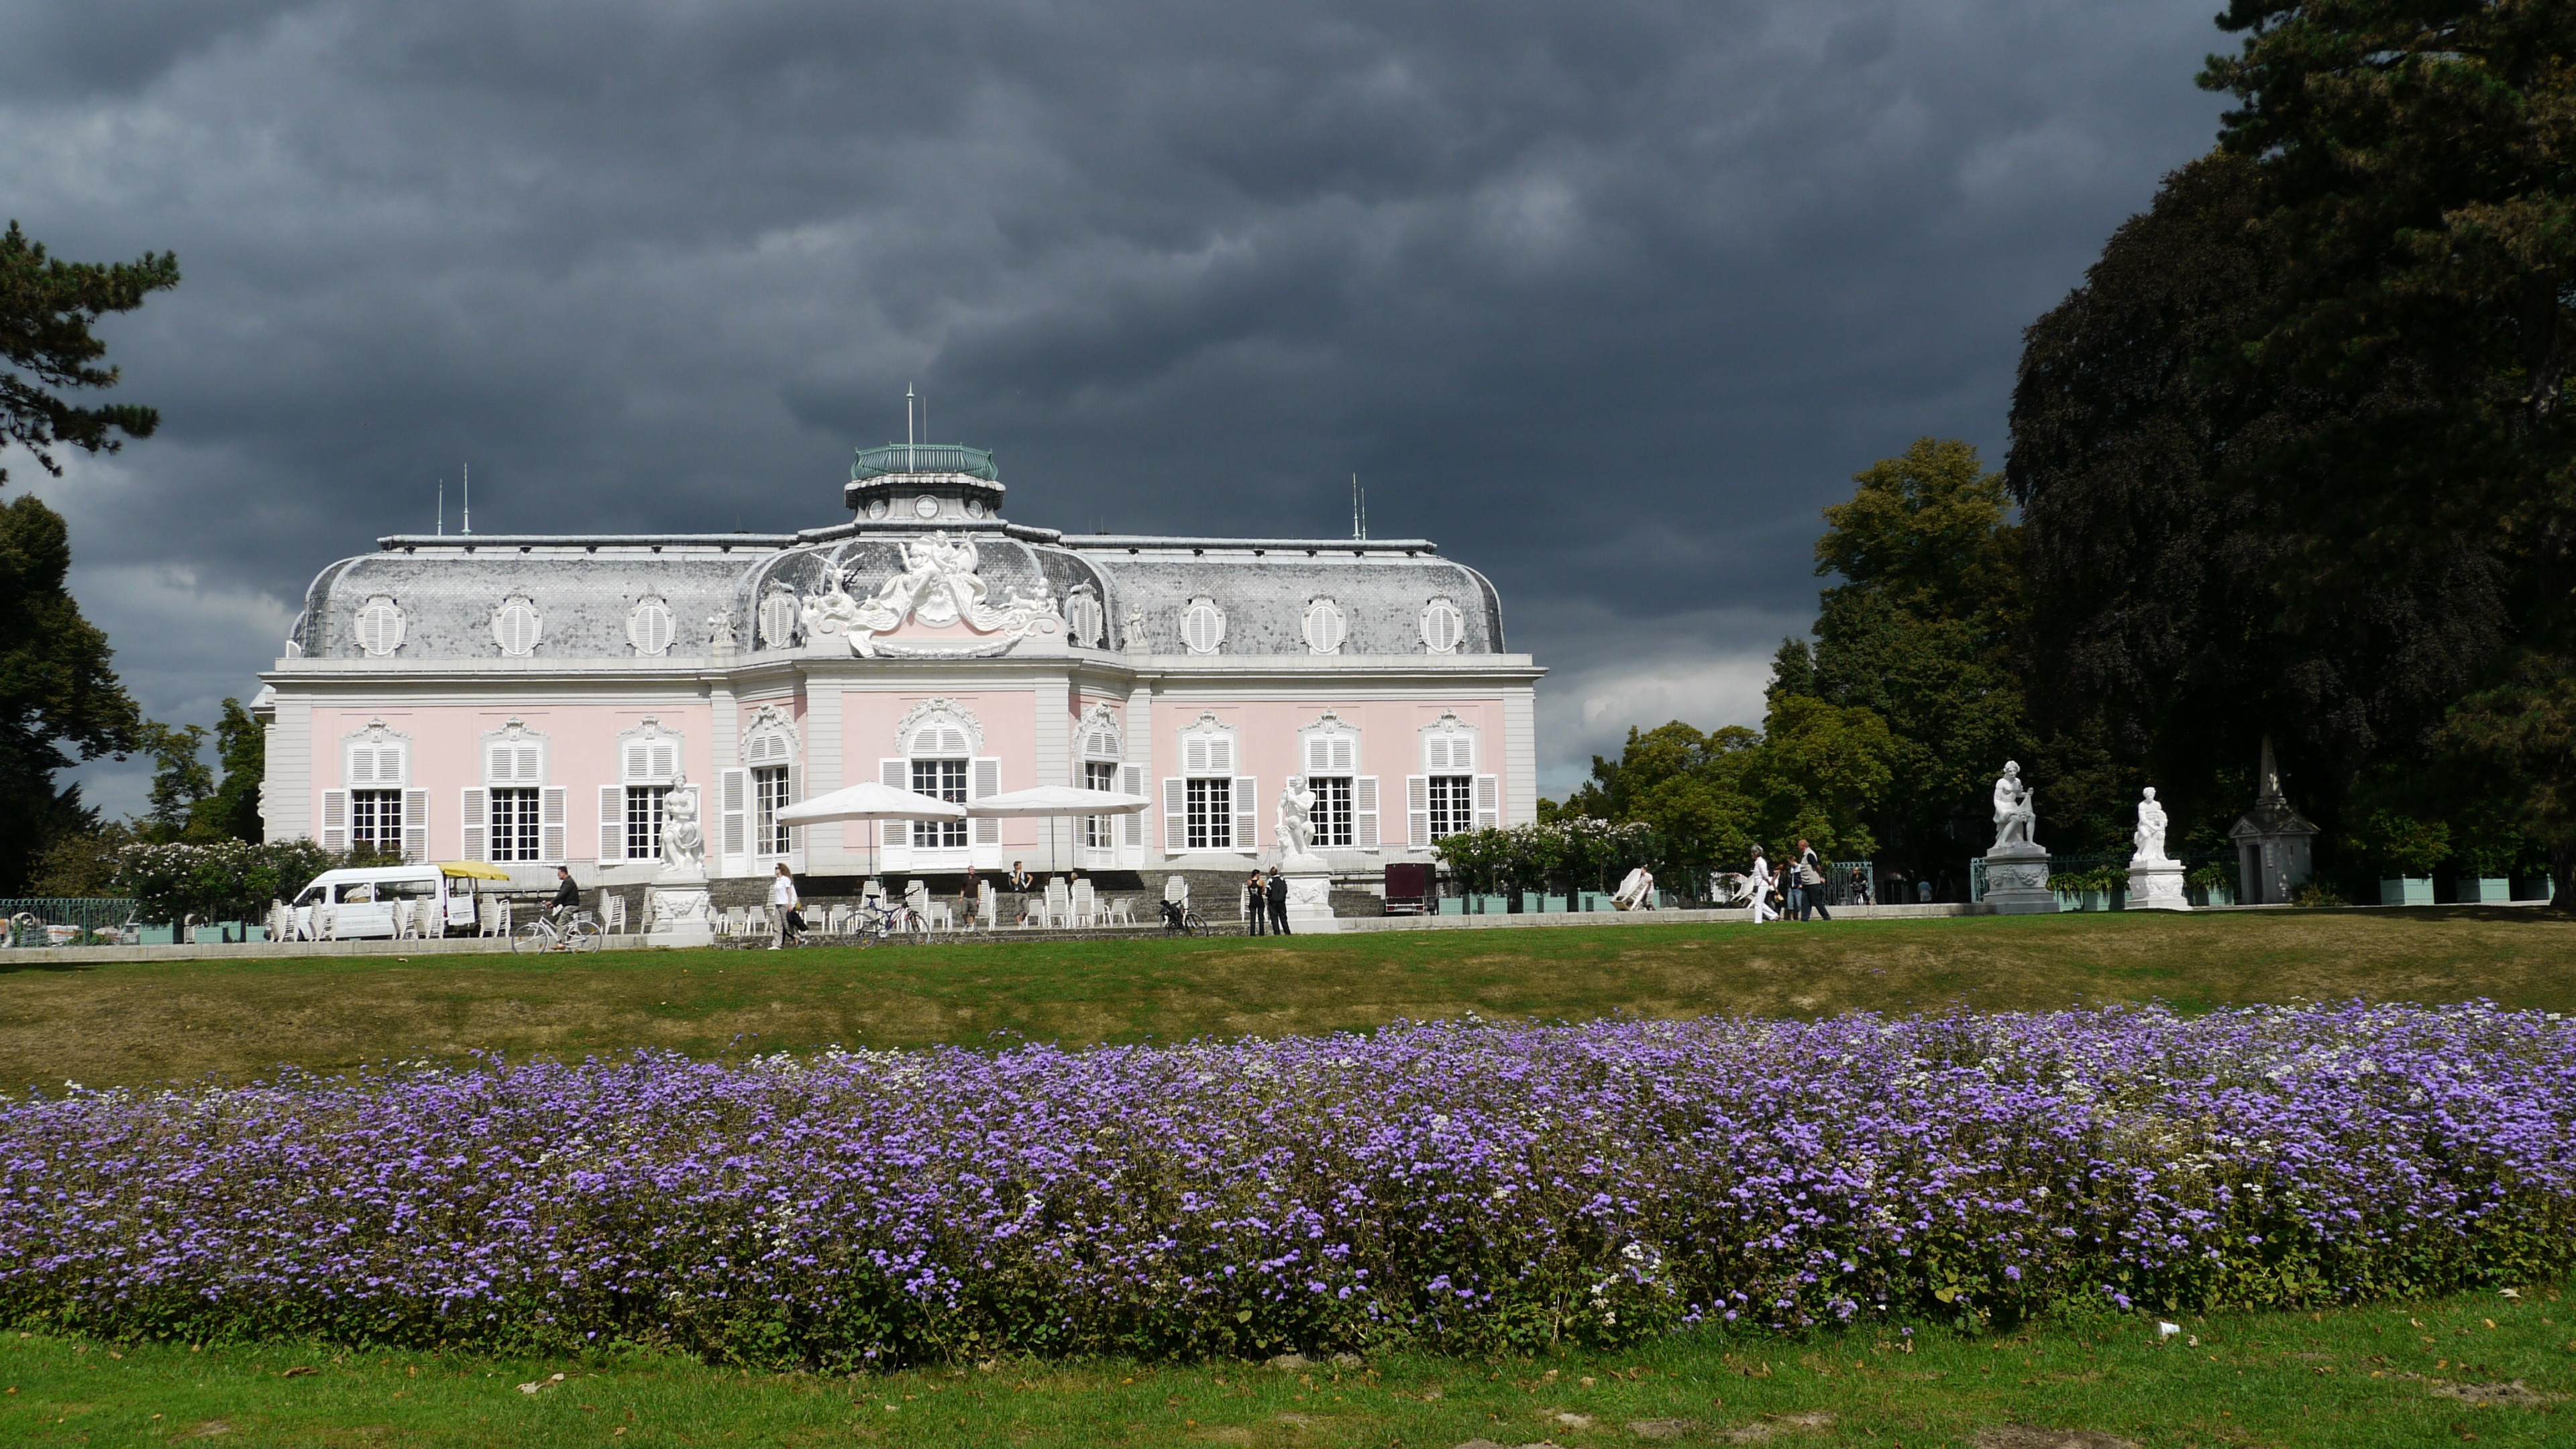 Palace: Benrath Palace, A Baroque-style palace, Located in a borough of Dusseldorf. 3840x2160 4K Wallpaper.